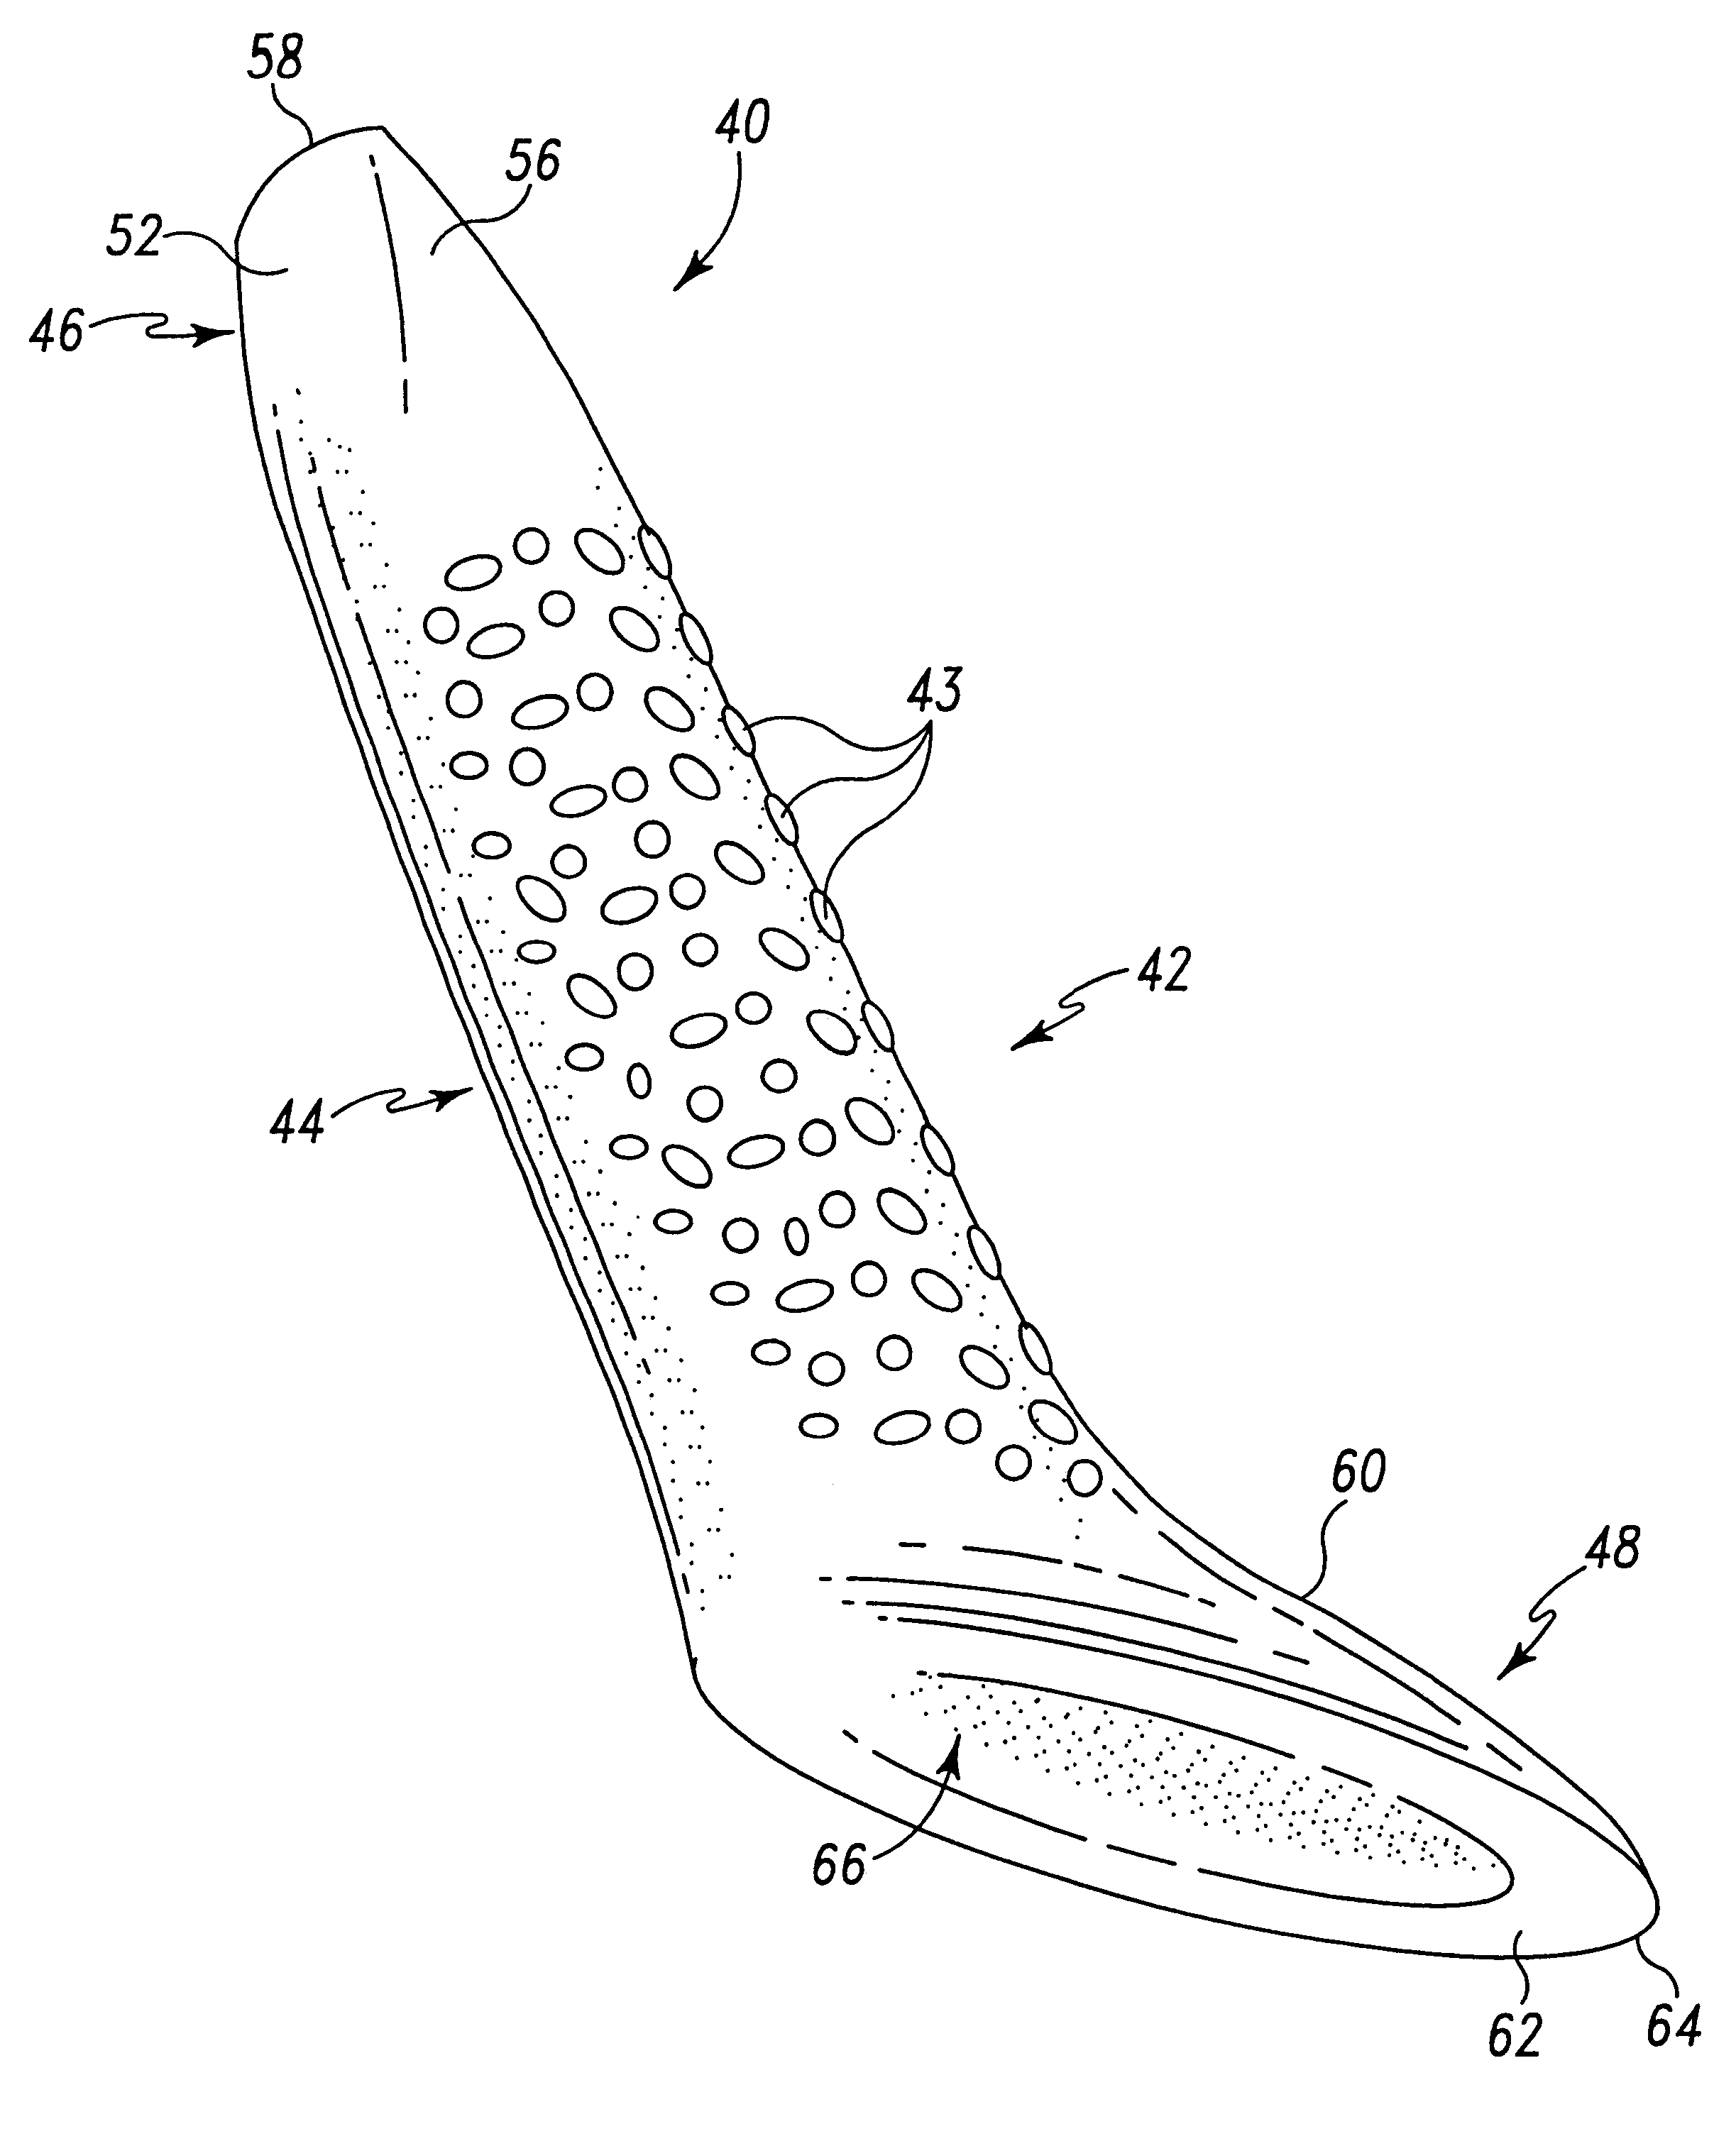 Instrument for diagnosing and treating soft tissue abnormalities through augmented soft tissue mobilization